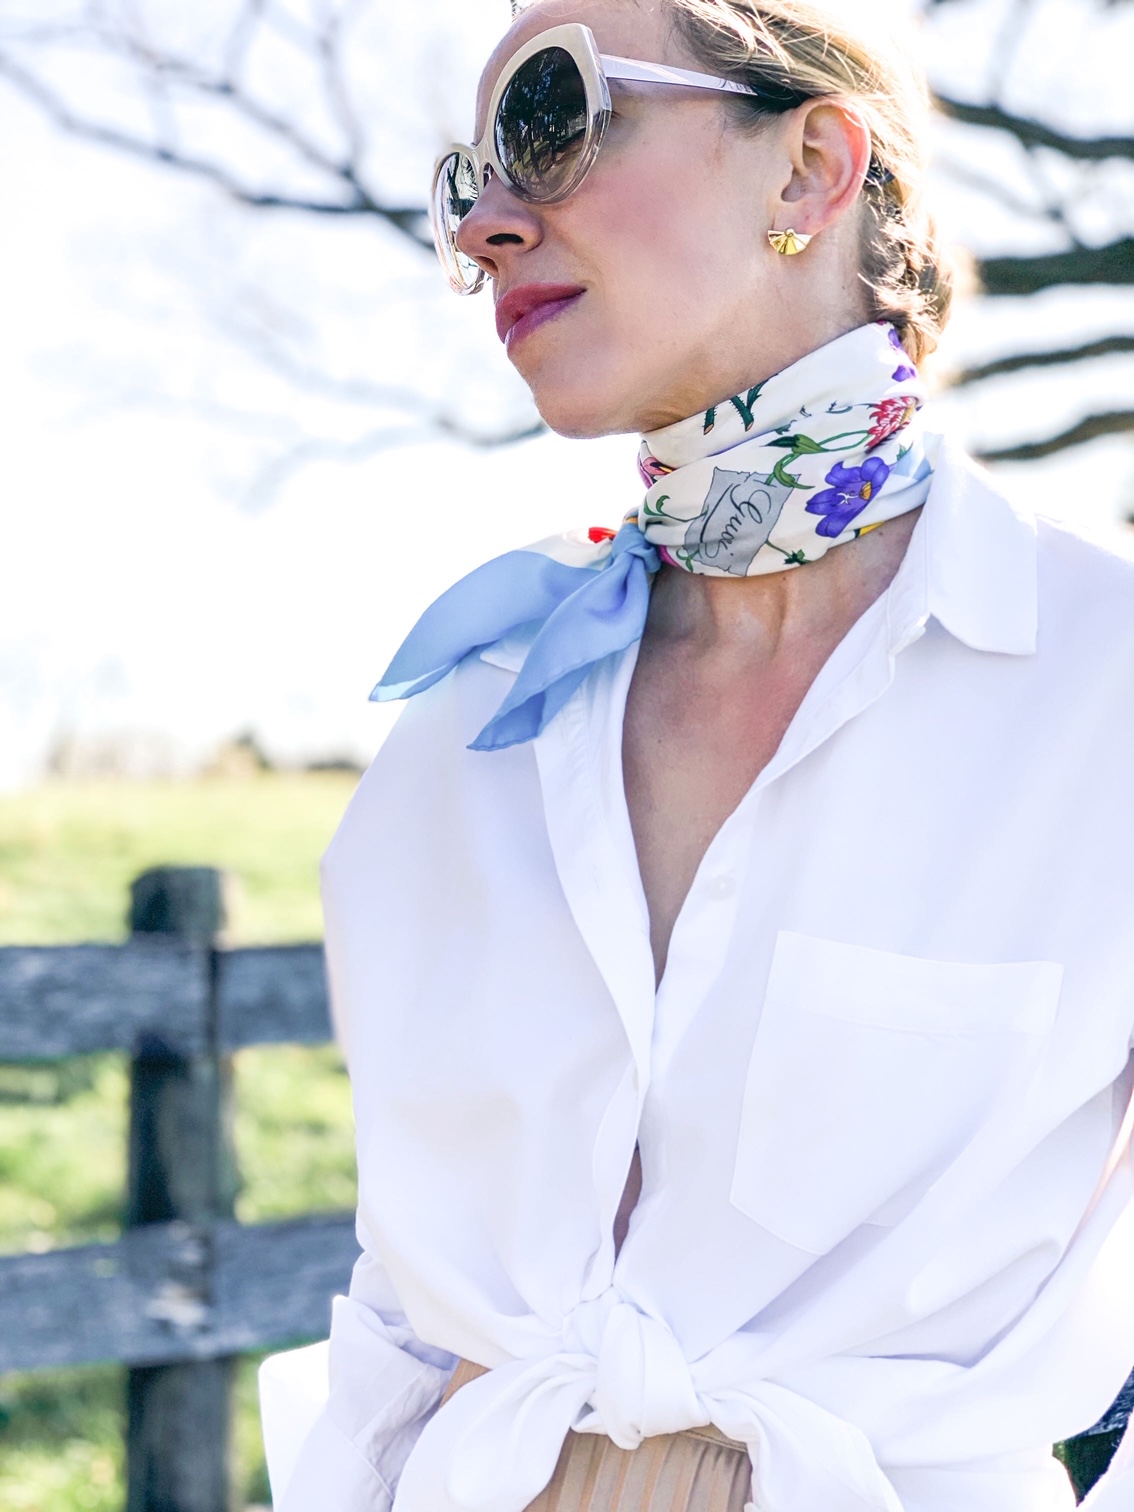 Romantic Spring Style: White Button Down, Silk Scarf & Pleated